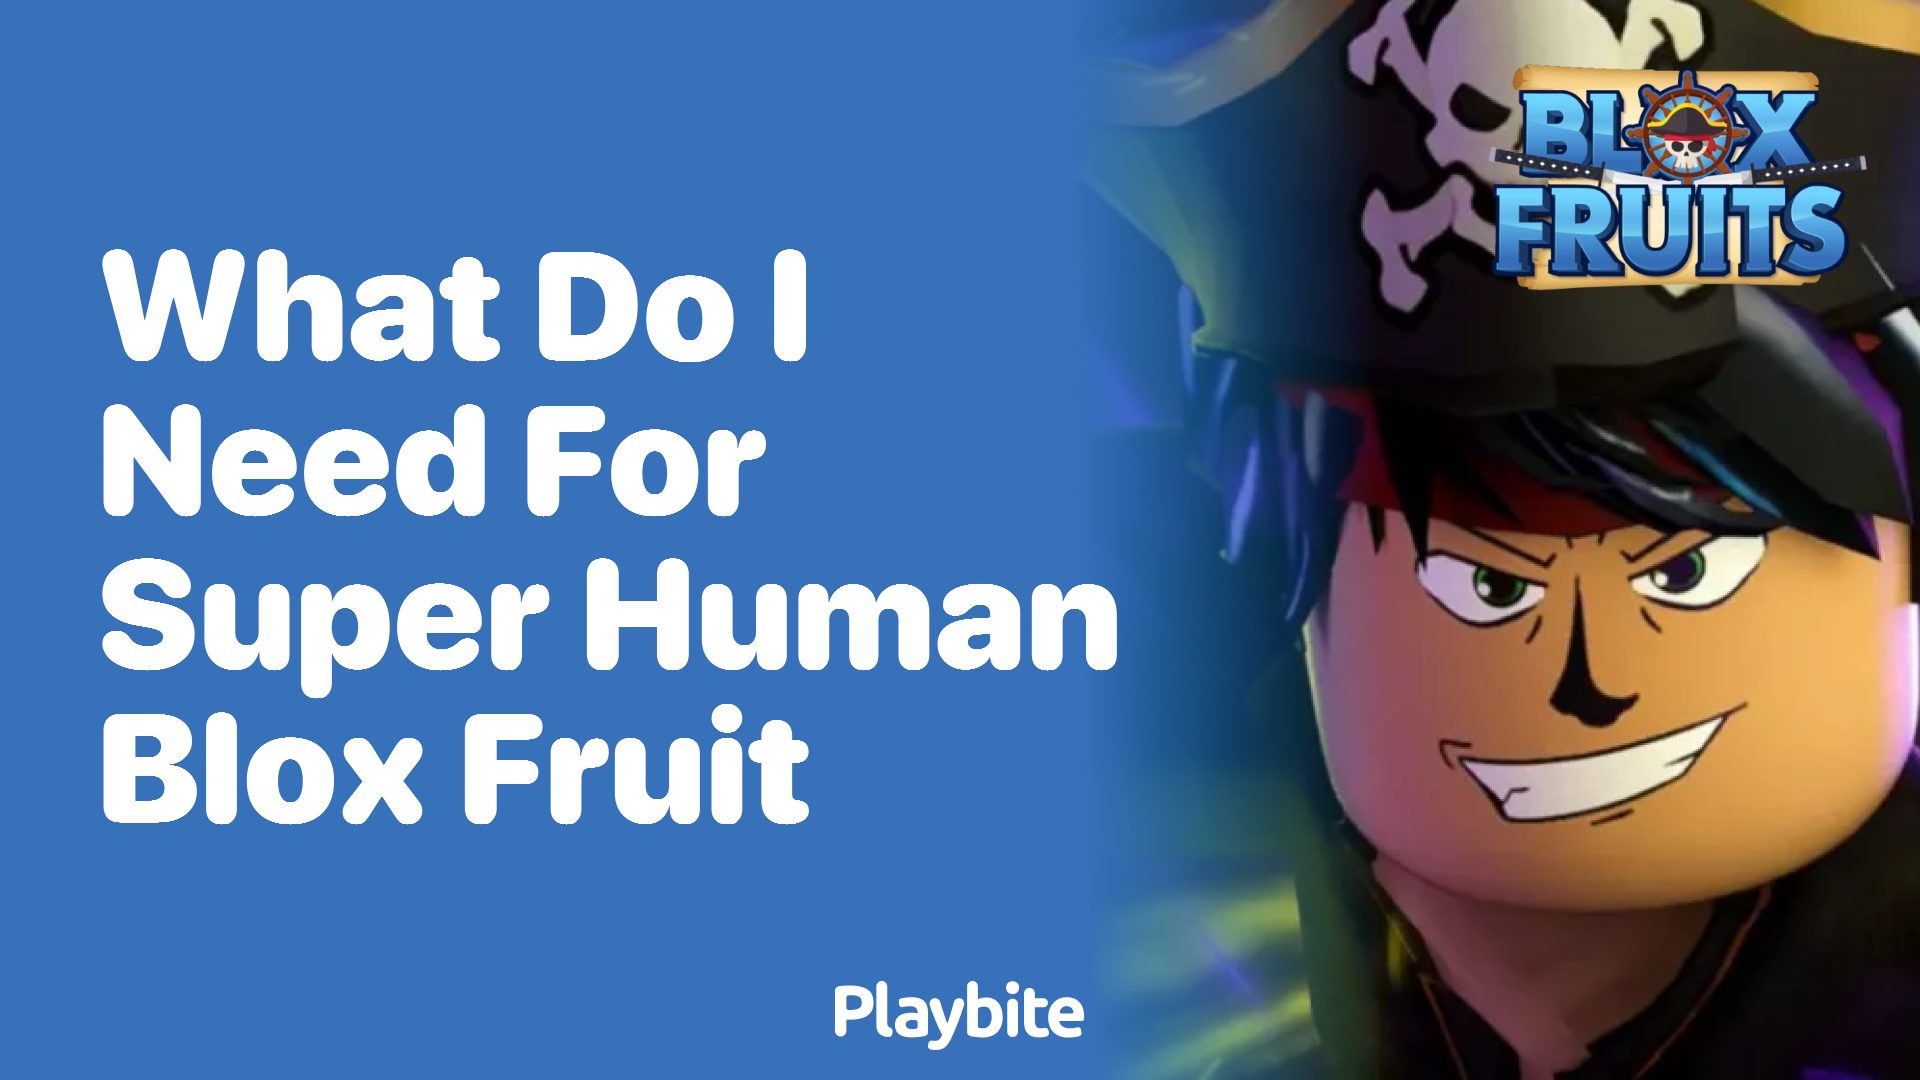 What Do I Need for Super Human Blox Fruit?